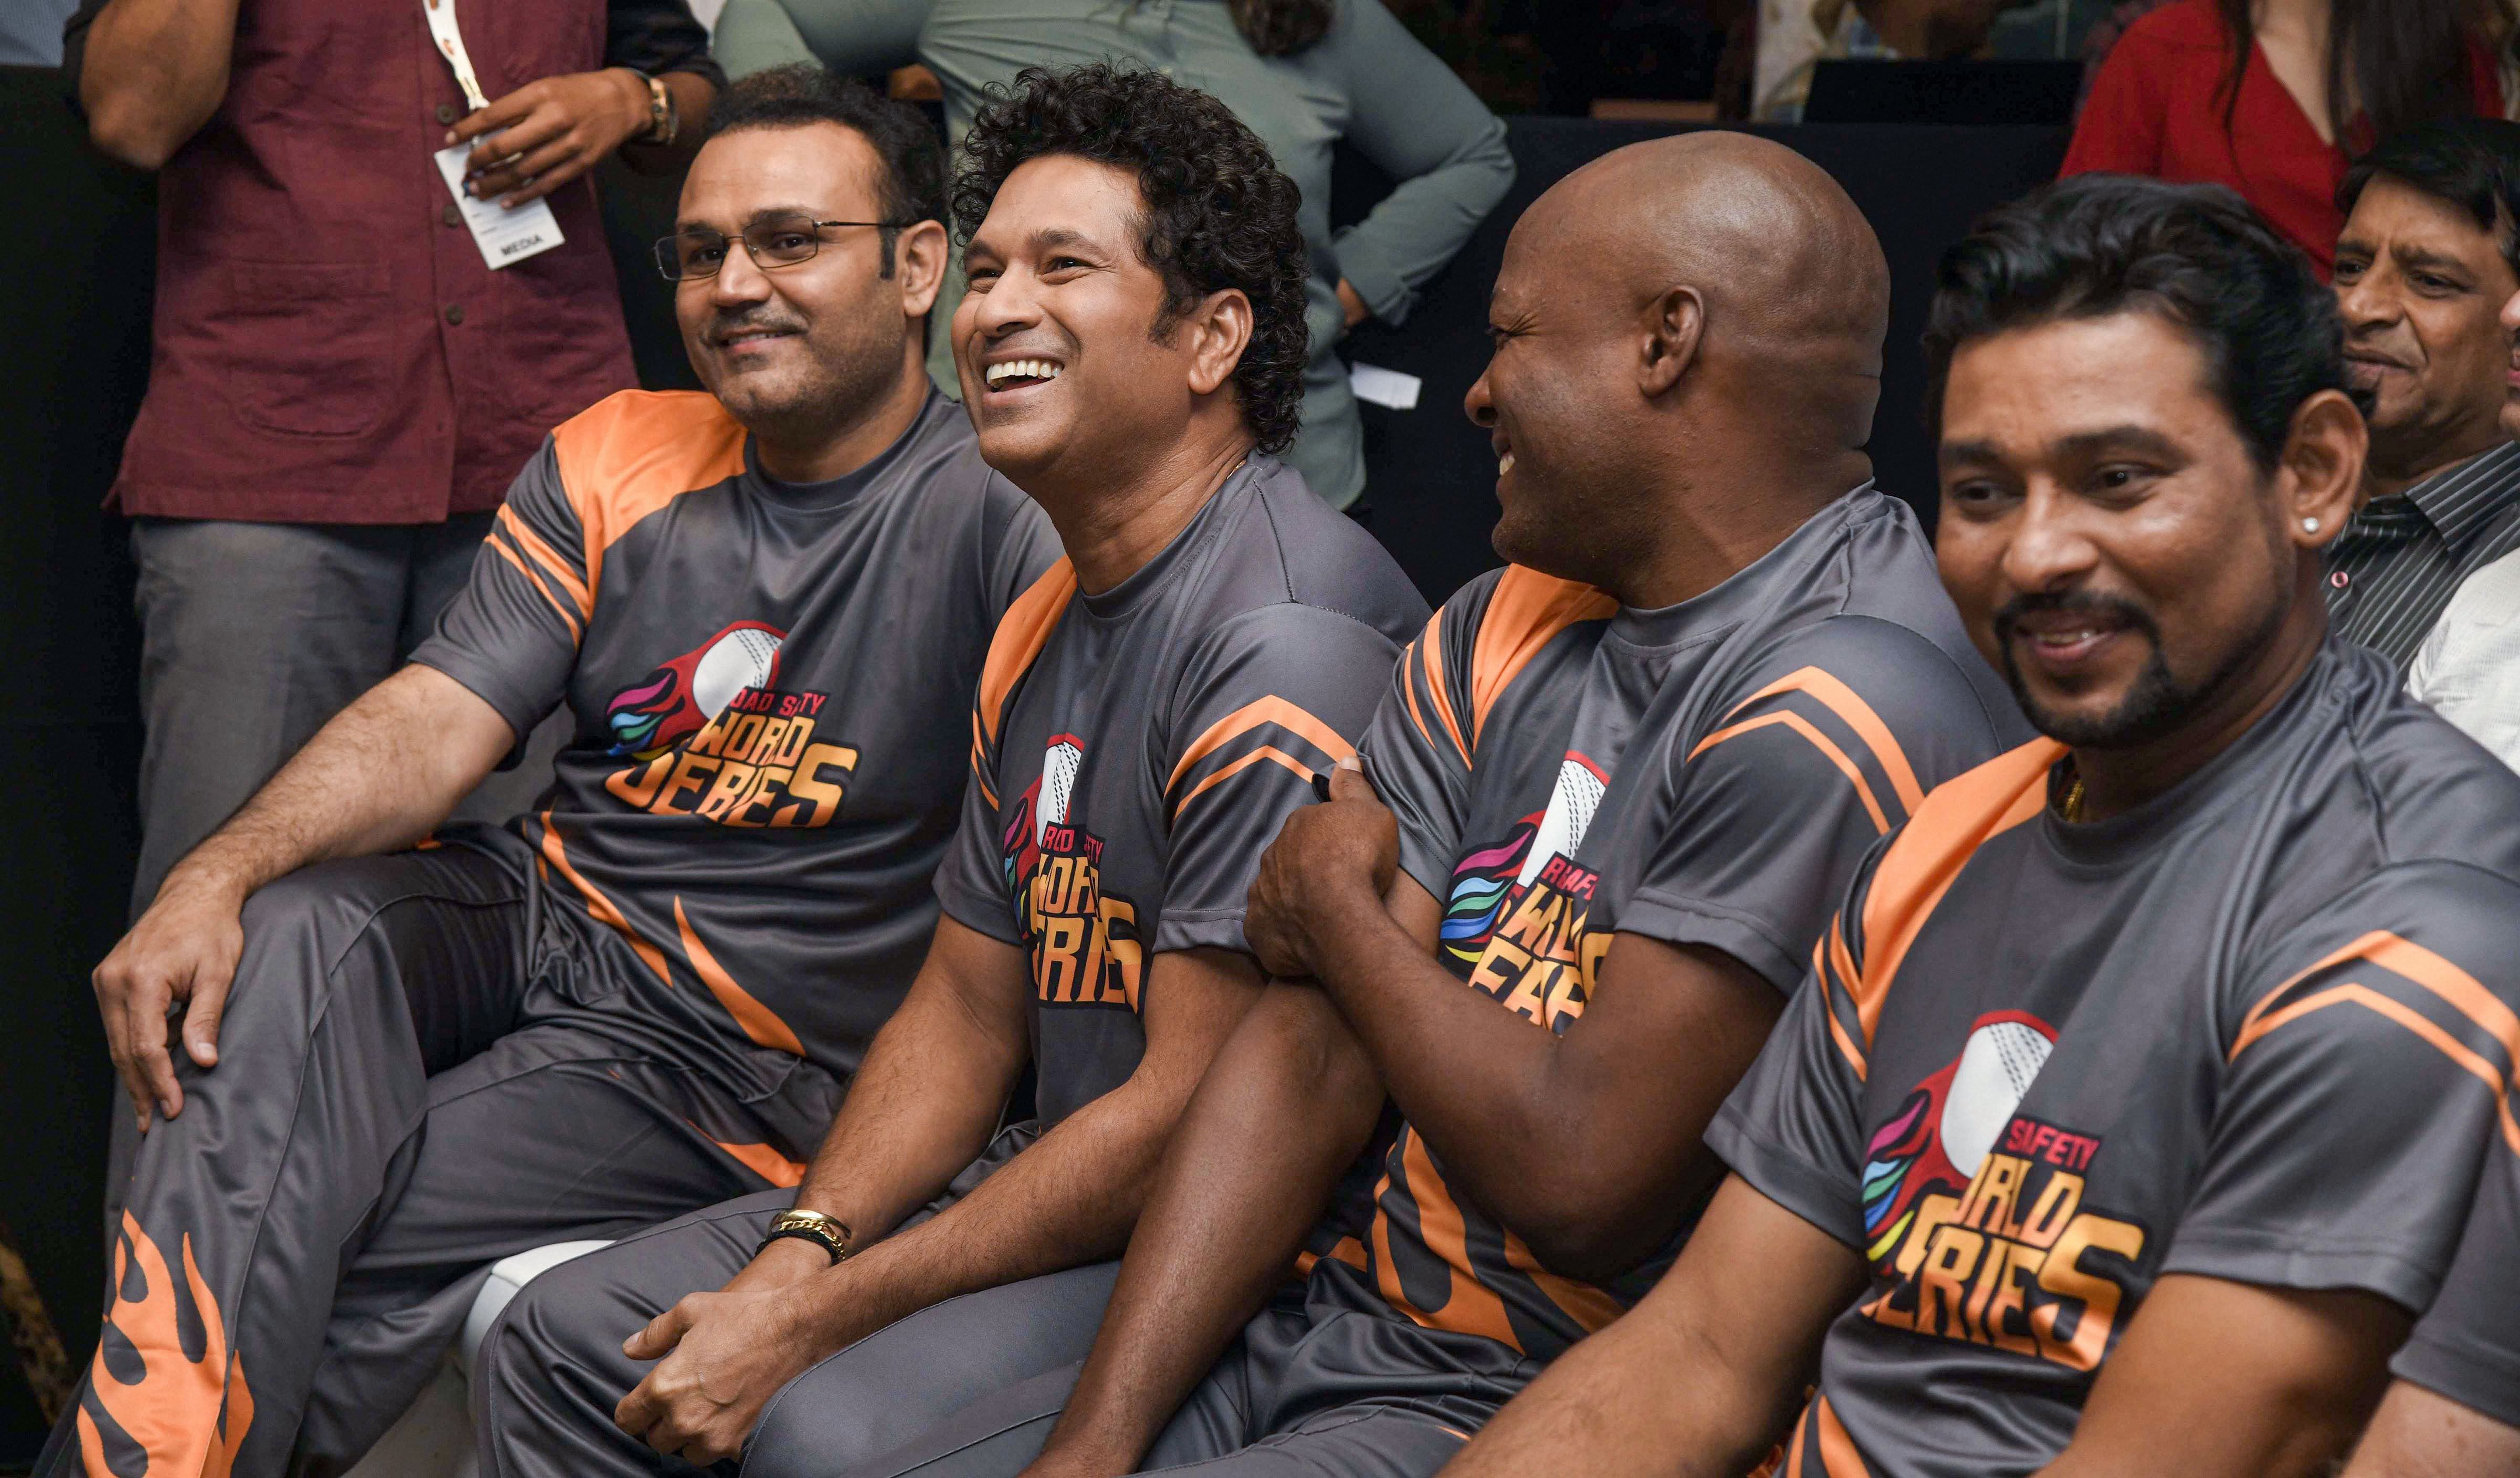 Cricket legends Virendra Sehwag, Sachin Tendulkar, Brian Lara and Tilakratne Dilshan at the announcement of the Road Safety World Series in Mumbai, Thursday, Oct. 17, 2019. The series will be an annual T20 cricket tournament between legends of five cricket playing nations—Australia, South Africa, Sri Lanka, West Indies and host India. Credit: PTI Photo